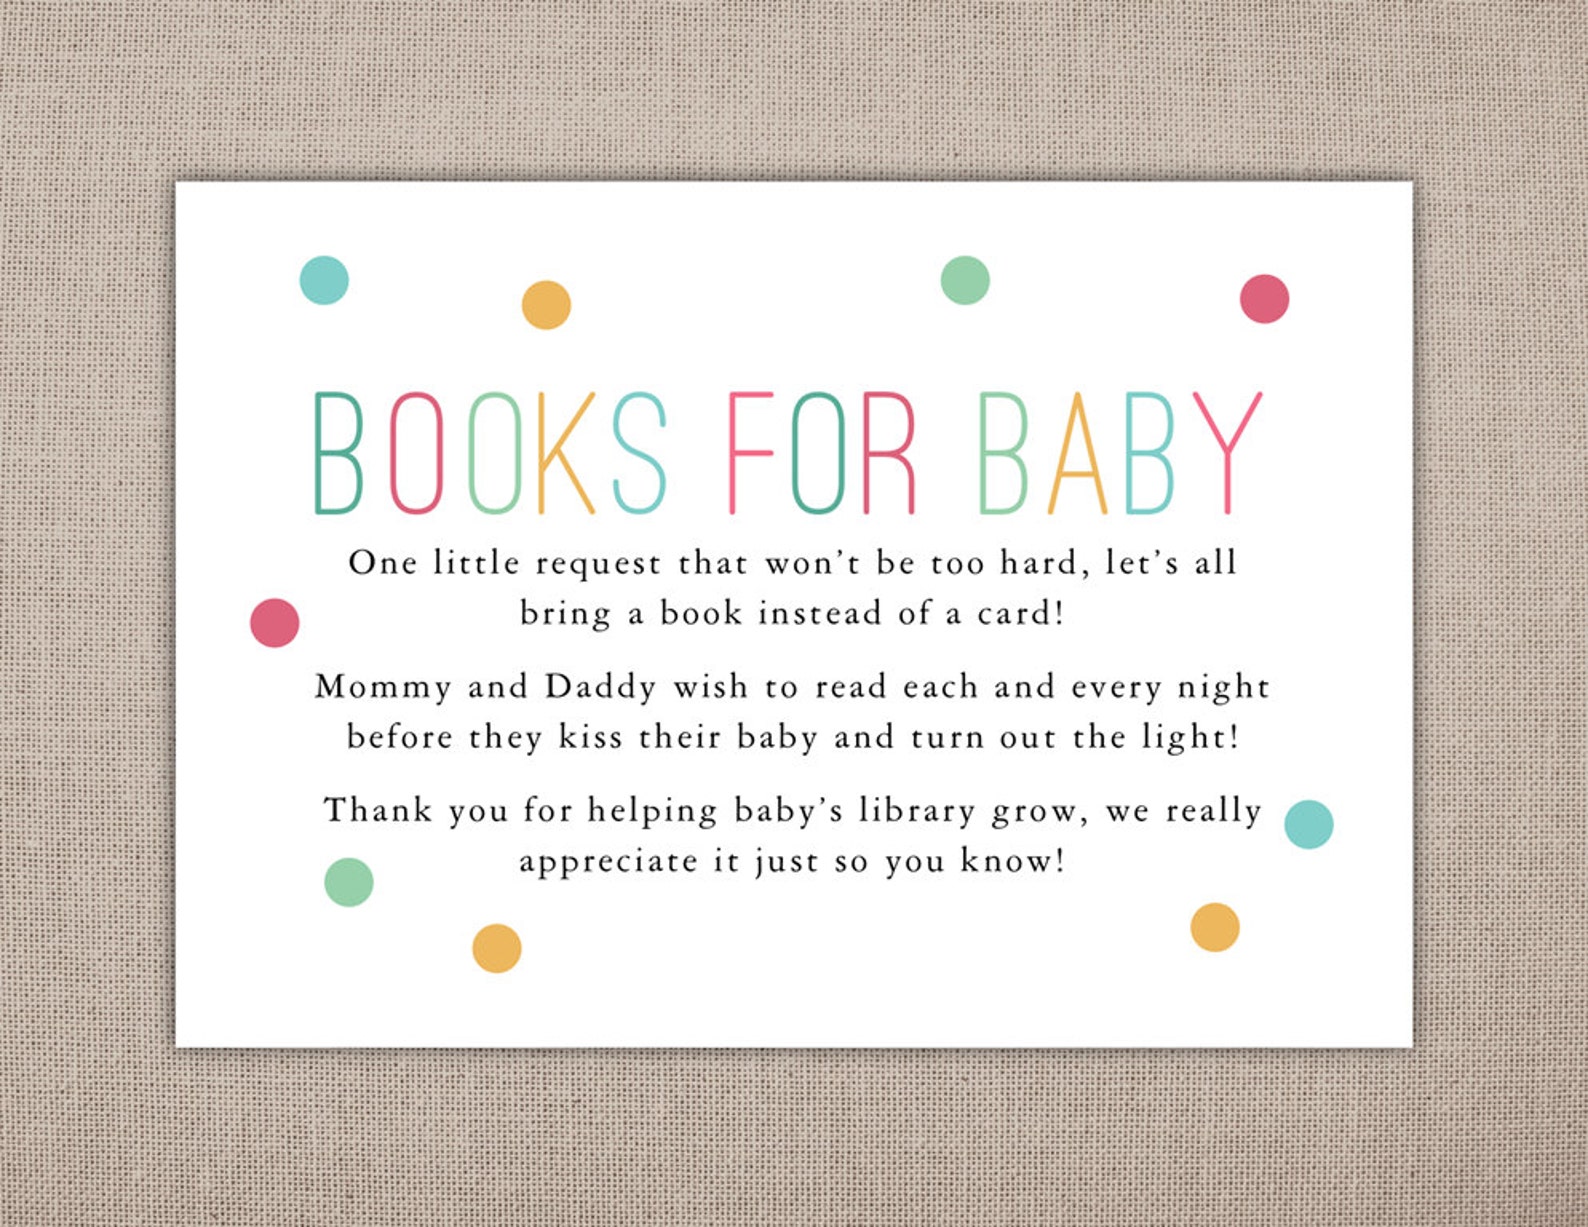 books-for-baby-printable-insert-card-book-request-baby-etsy